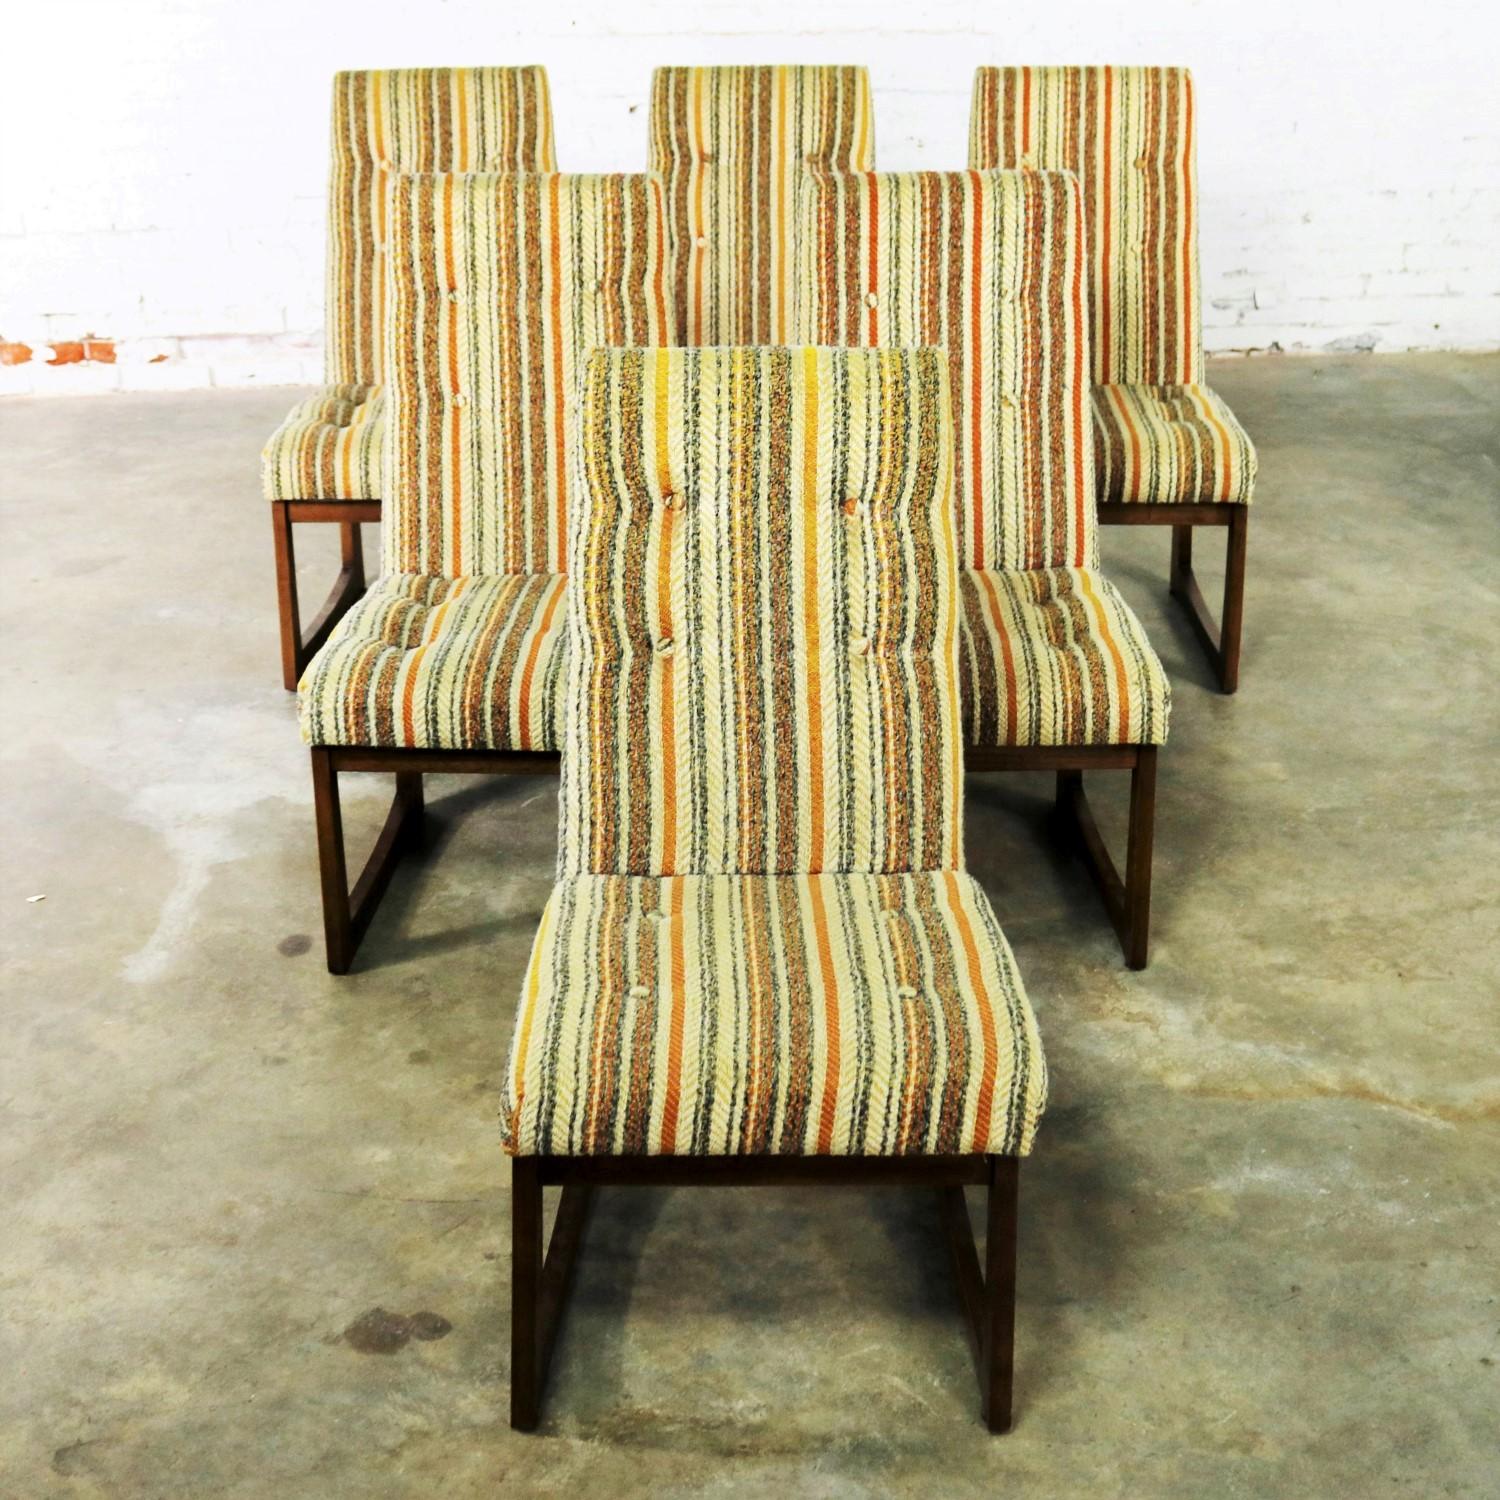 Handsome set of six Lane Alta Vista Mid-Century Modern dining chairs in their original striped upholstery. They are in fabulous vintage condition even the original upholstery although you may want to change it, circa 1974.

Wow! The modern style of